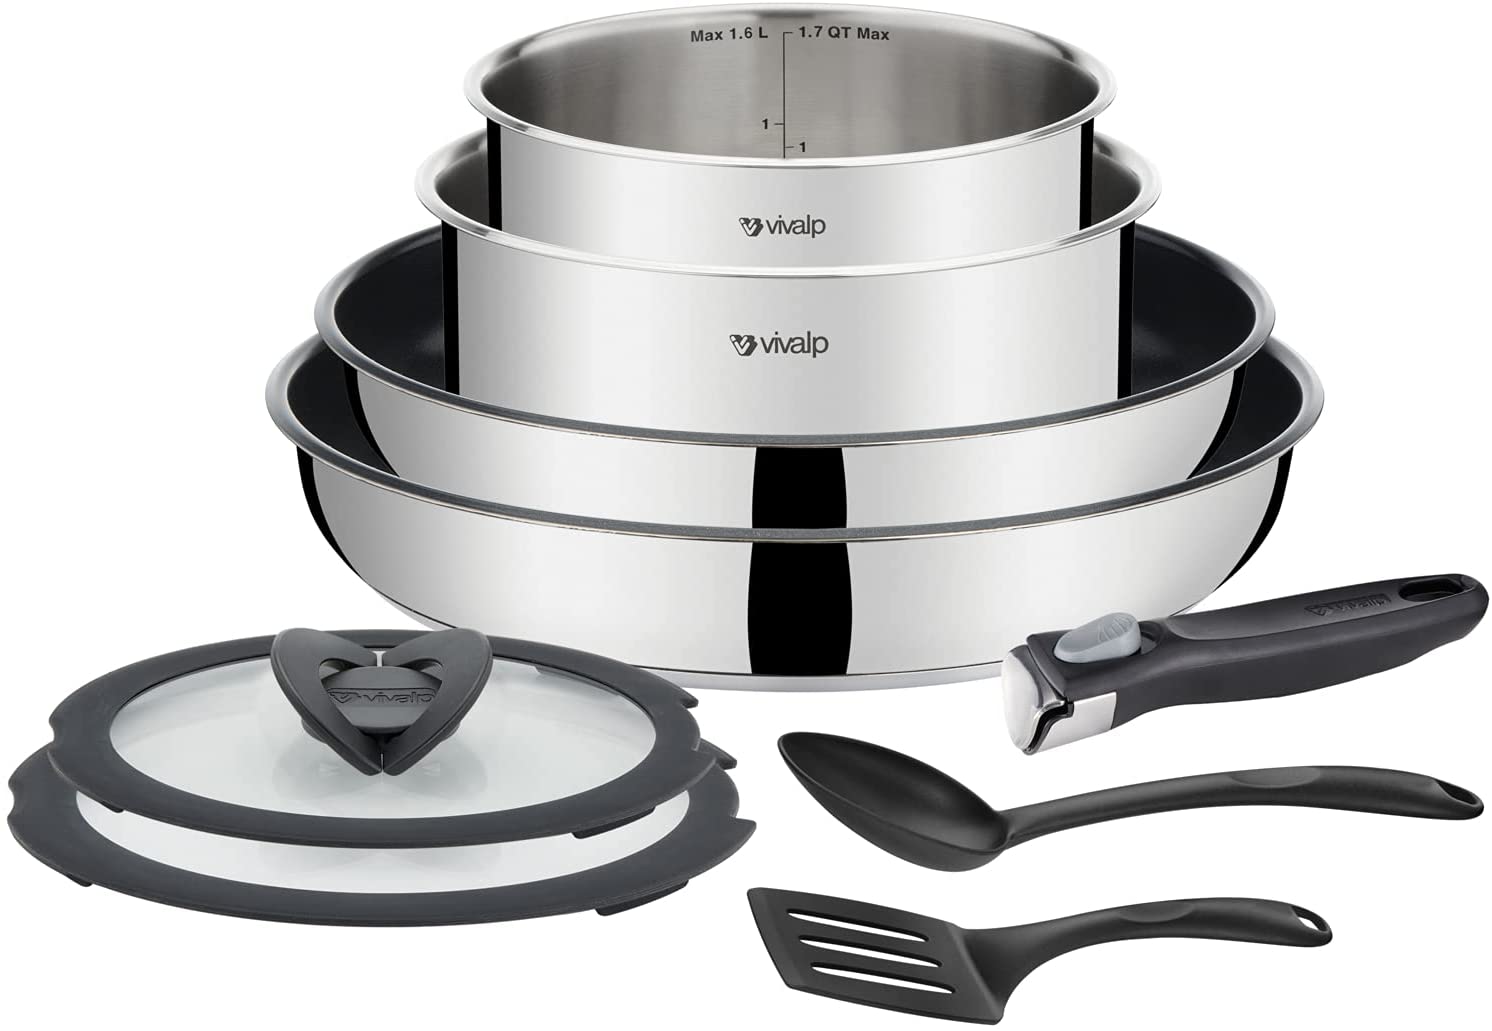 Ingenio von Tefal Vivalp L943S914 Set of 9 Removable Stainless Steel Suitable for All Hobs including Induction